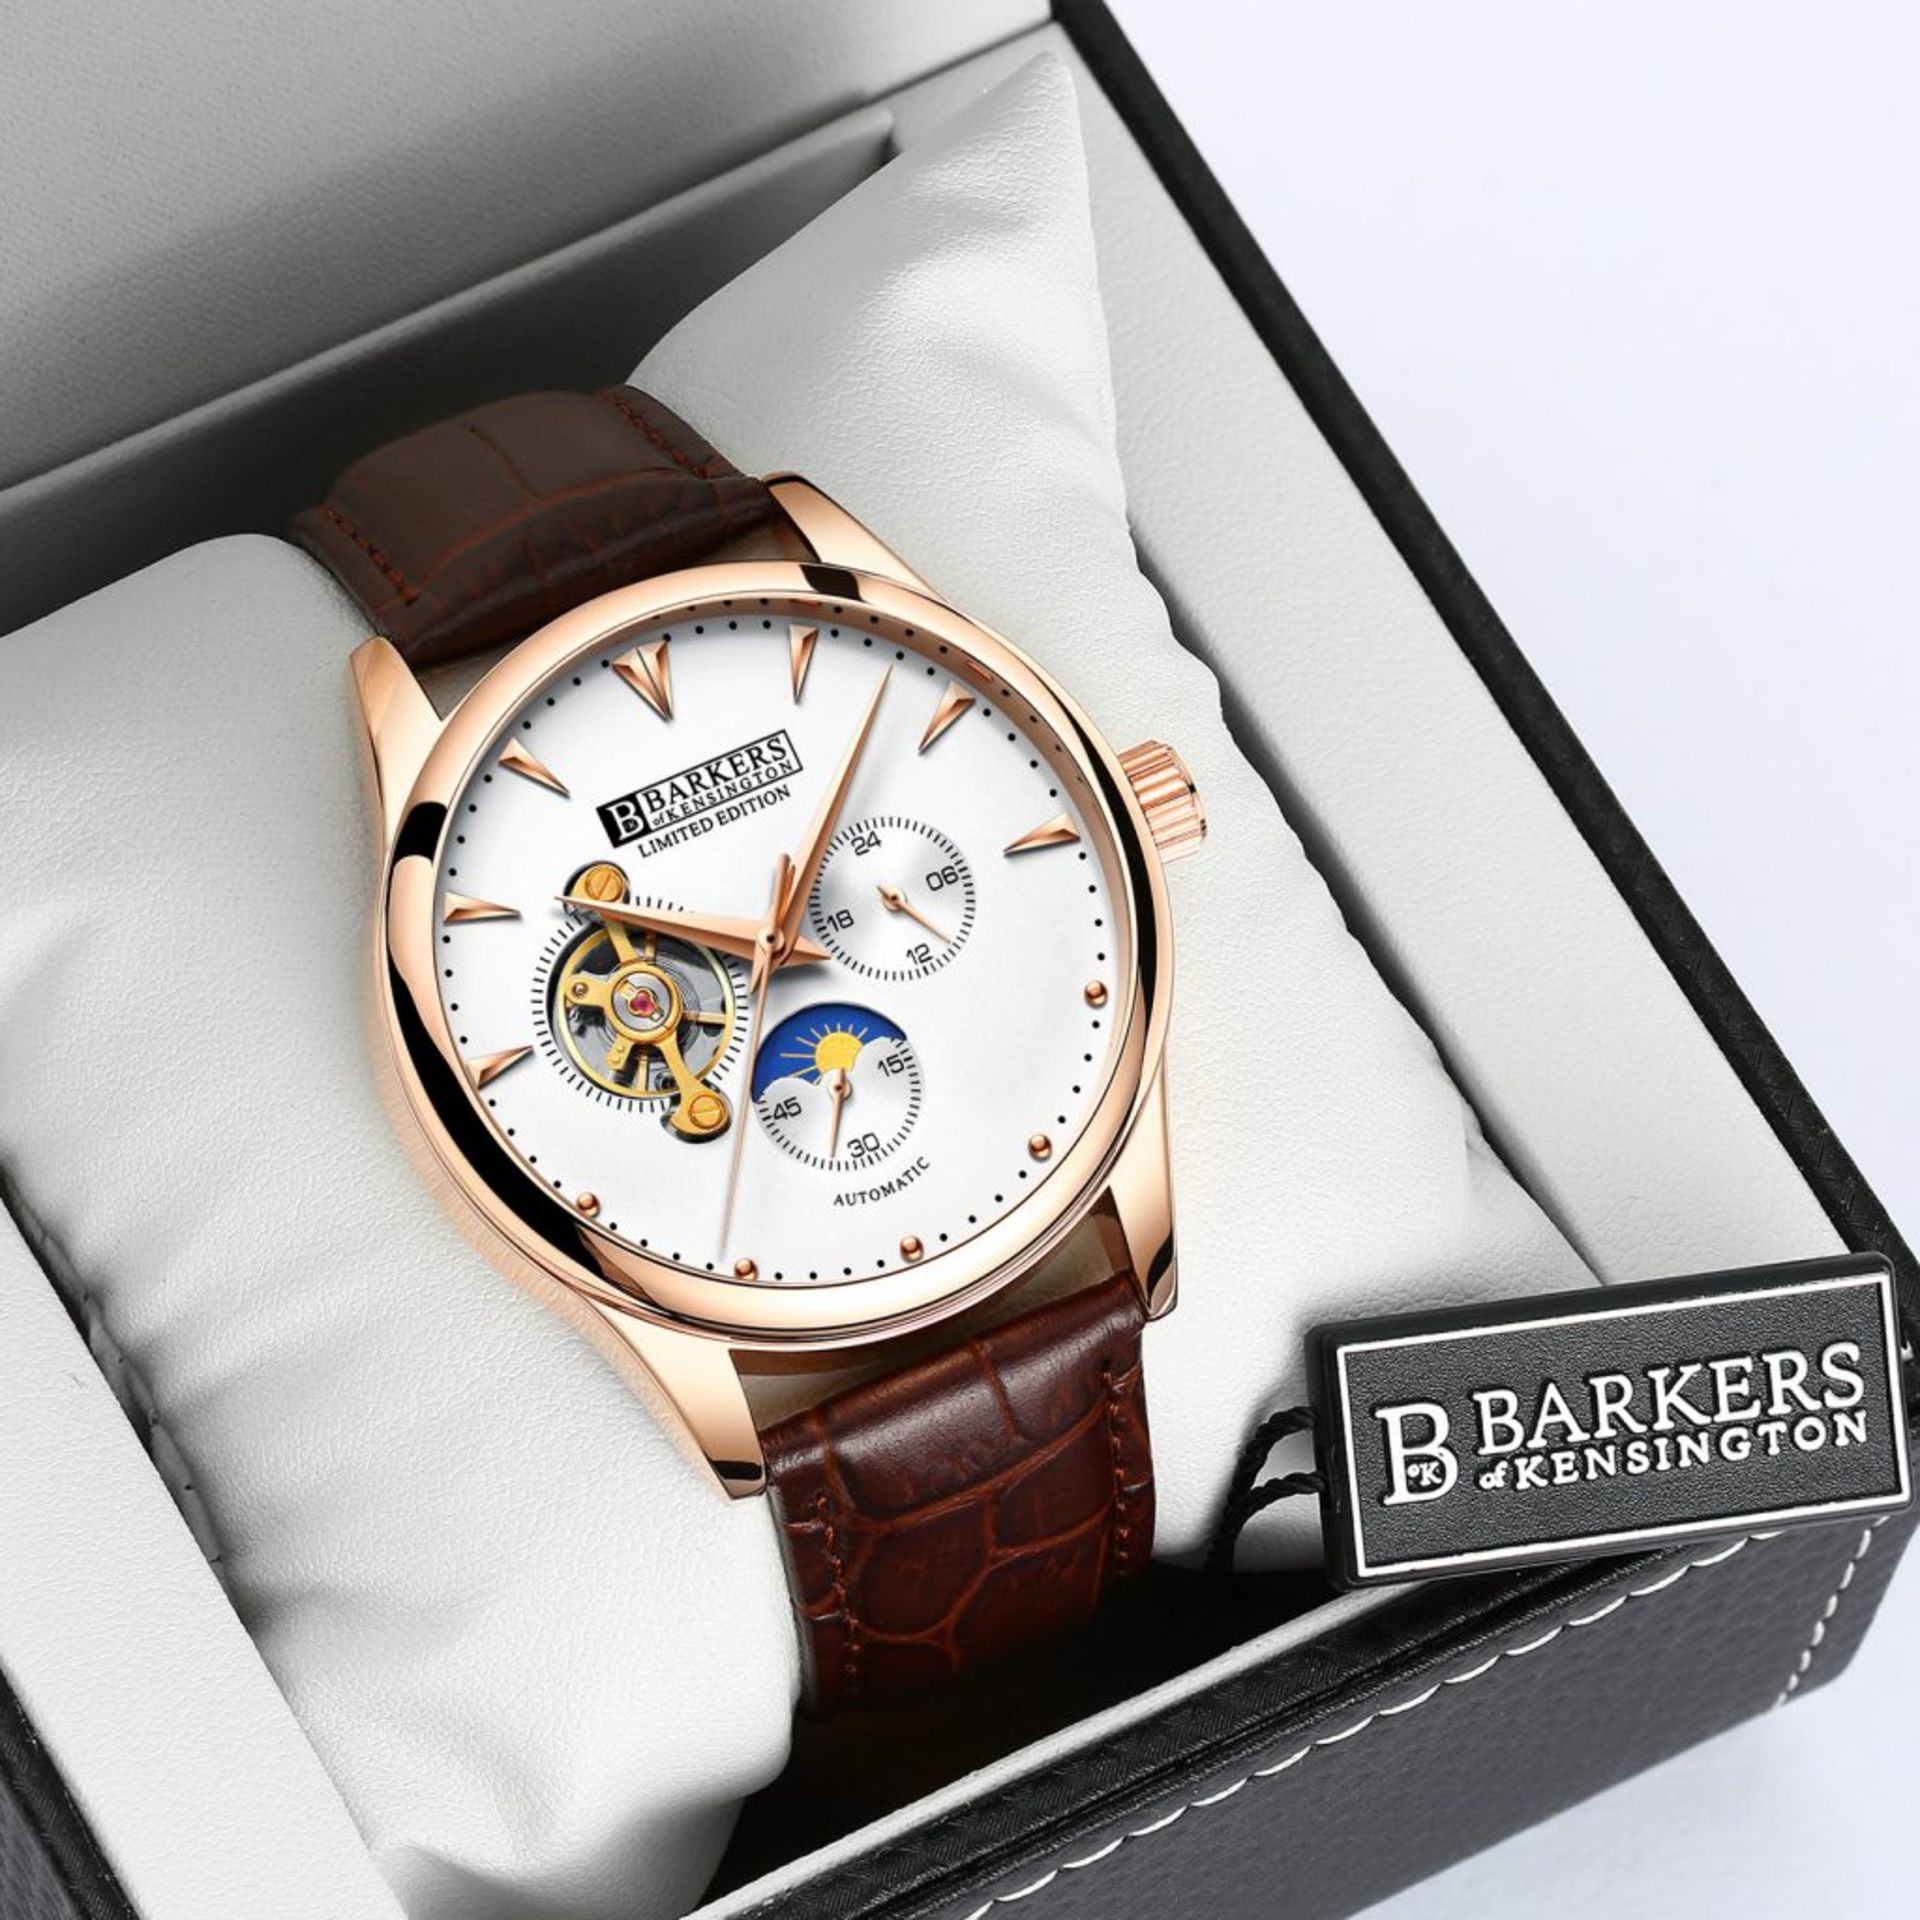 V Brand New Barkers of Kensington Automatic Rose Gold Watch - With Certificate - Boxed - SRP £525.